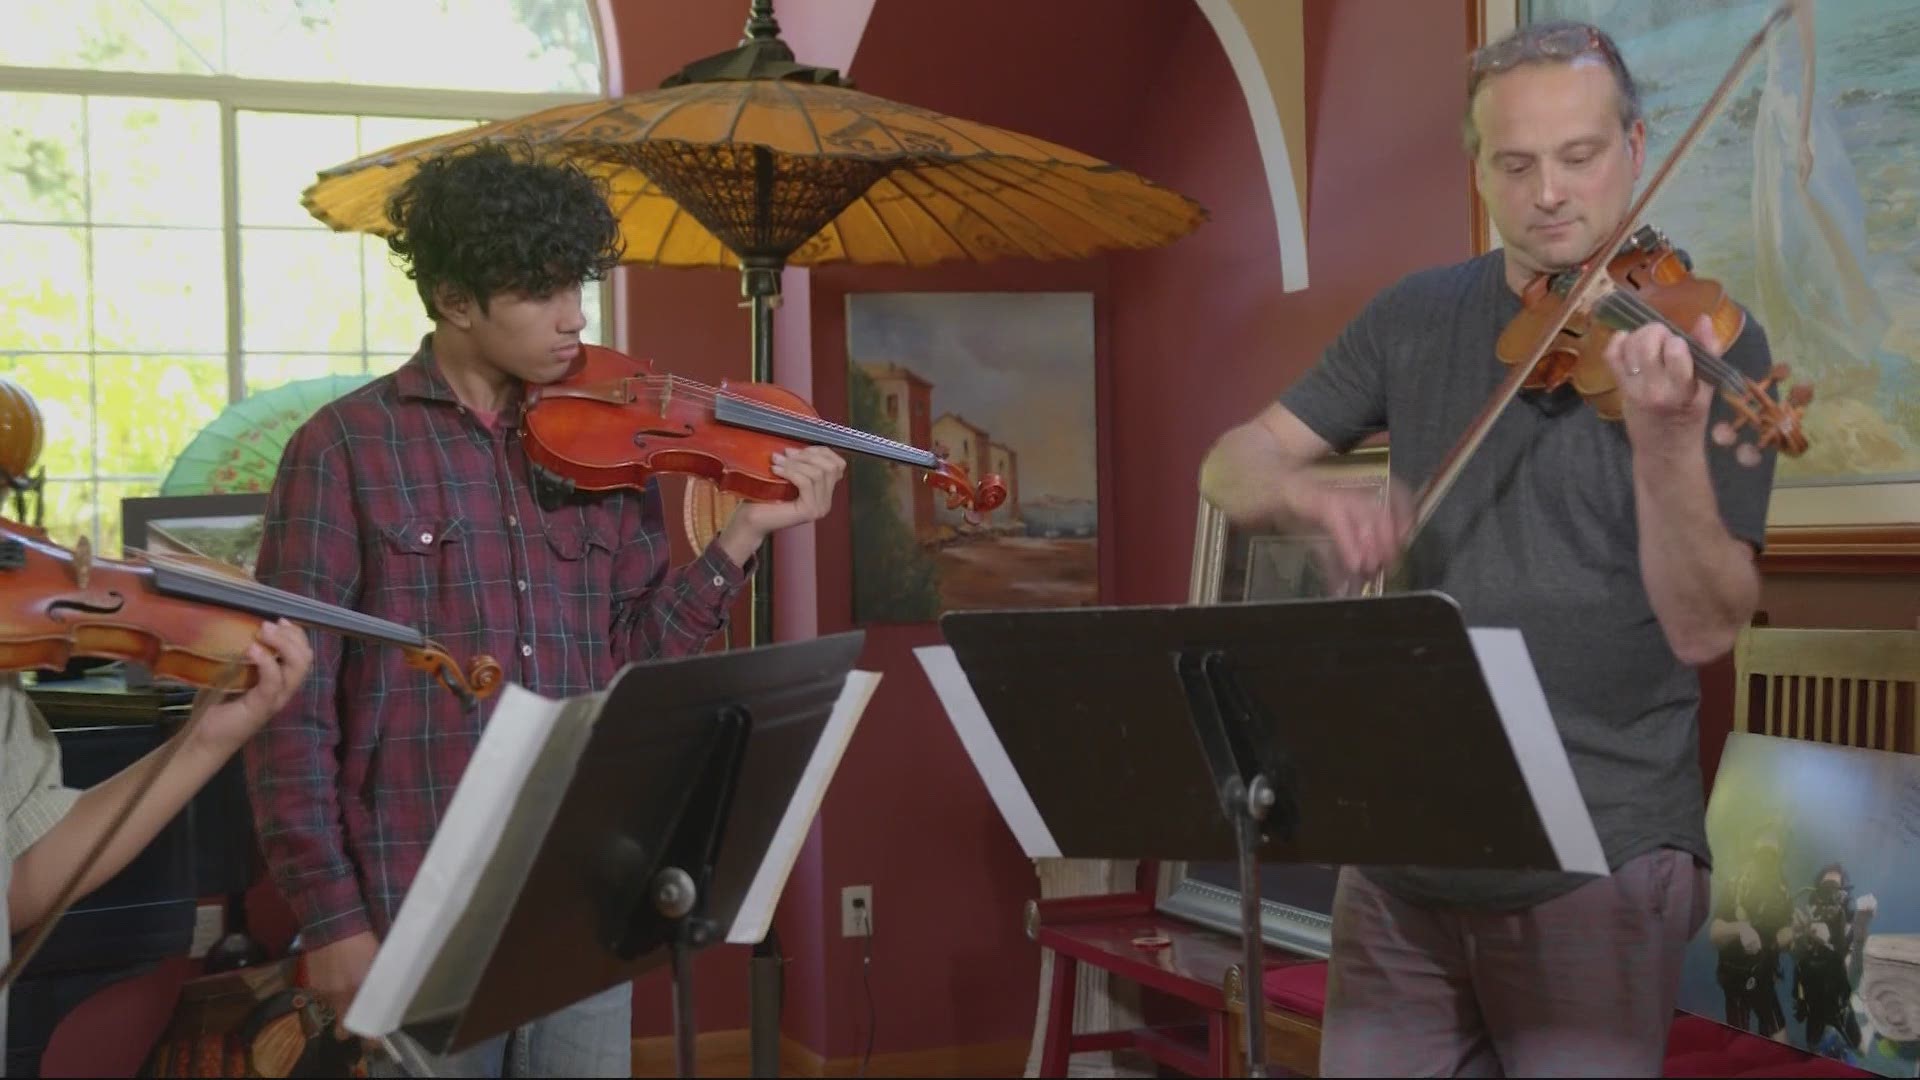 Aaron Meyer, known as Portland's "concert rock violinist," is raising money so he can teach more kids how to play the violin.